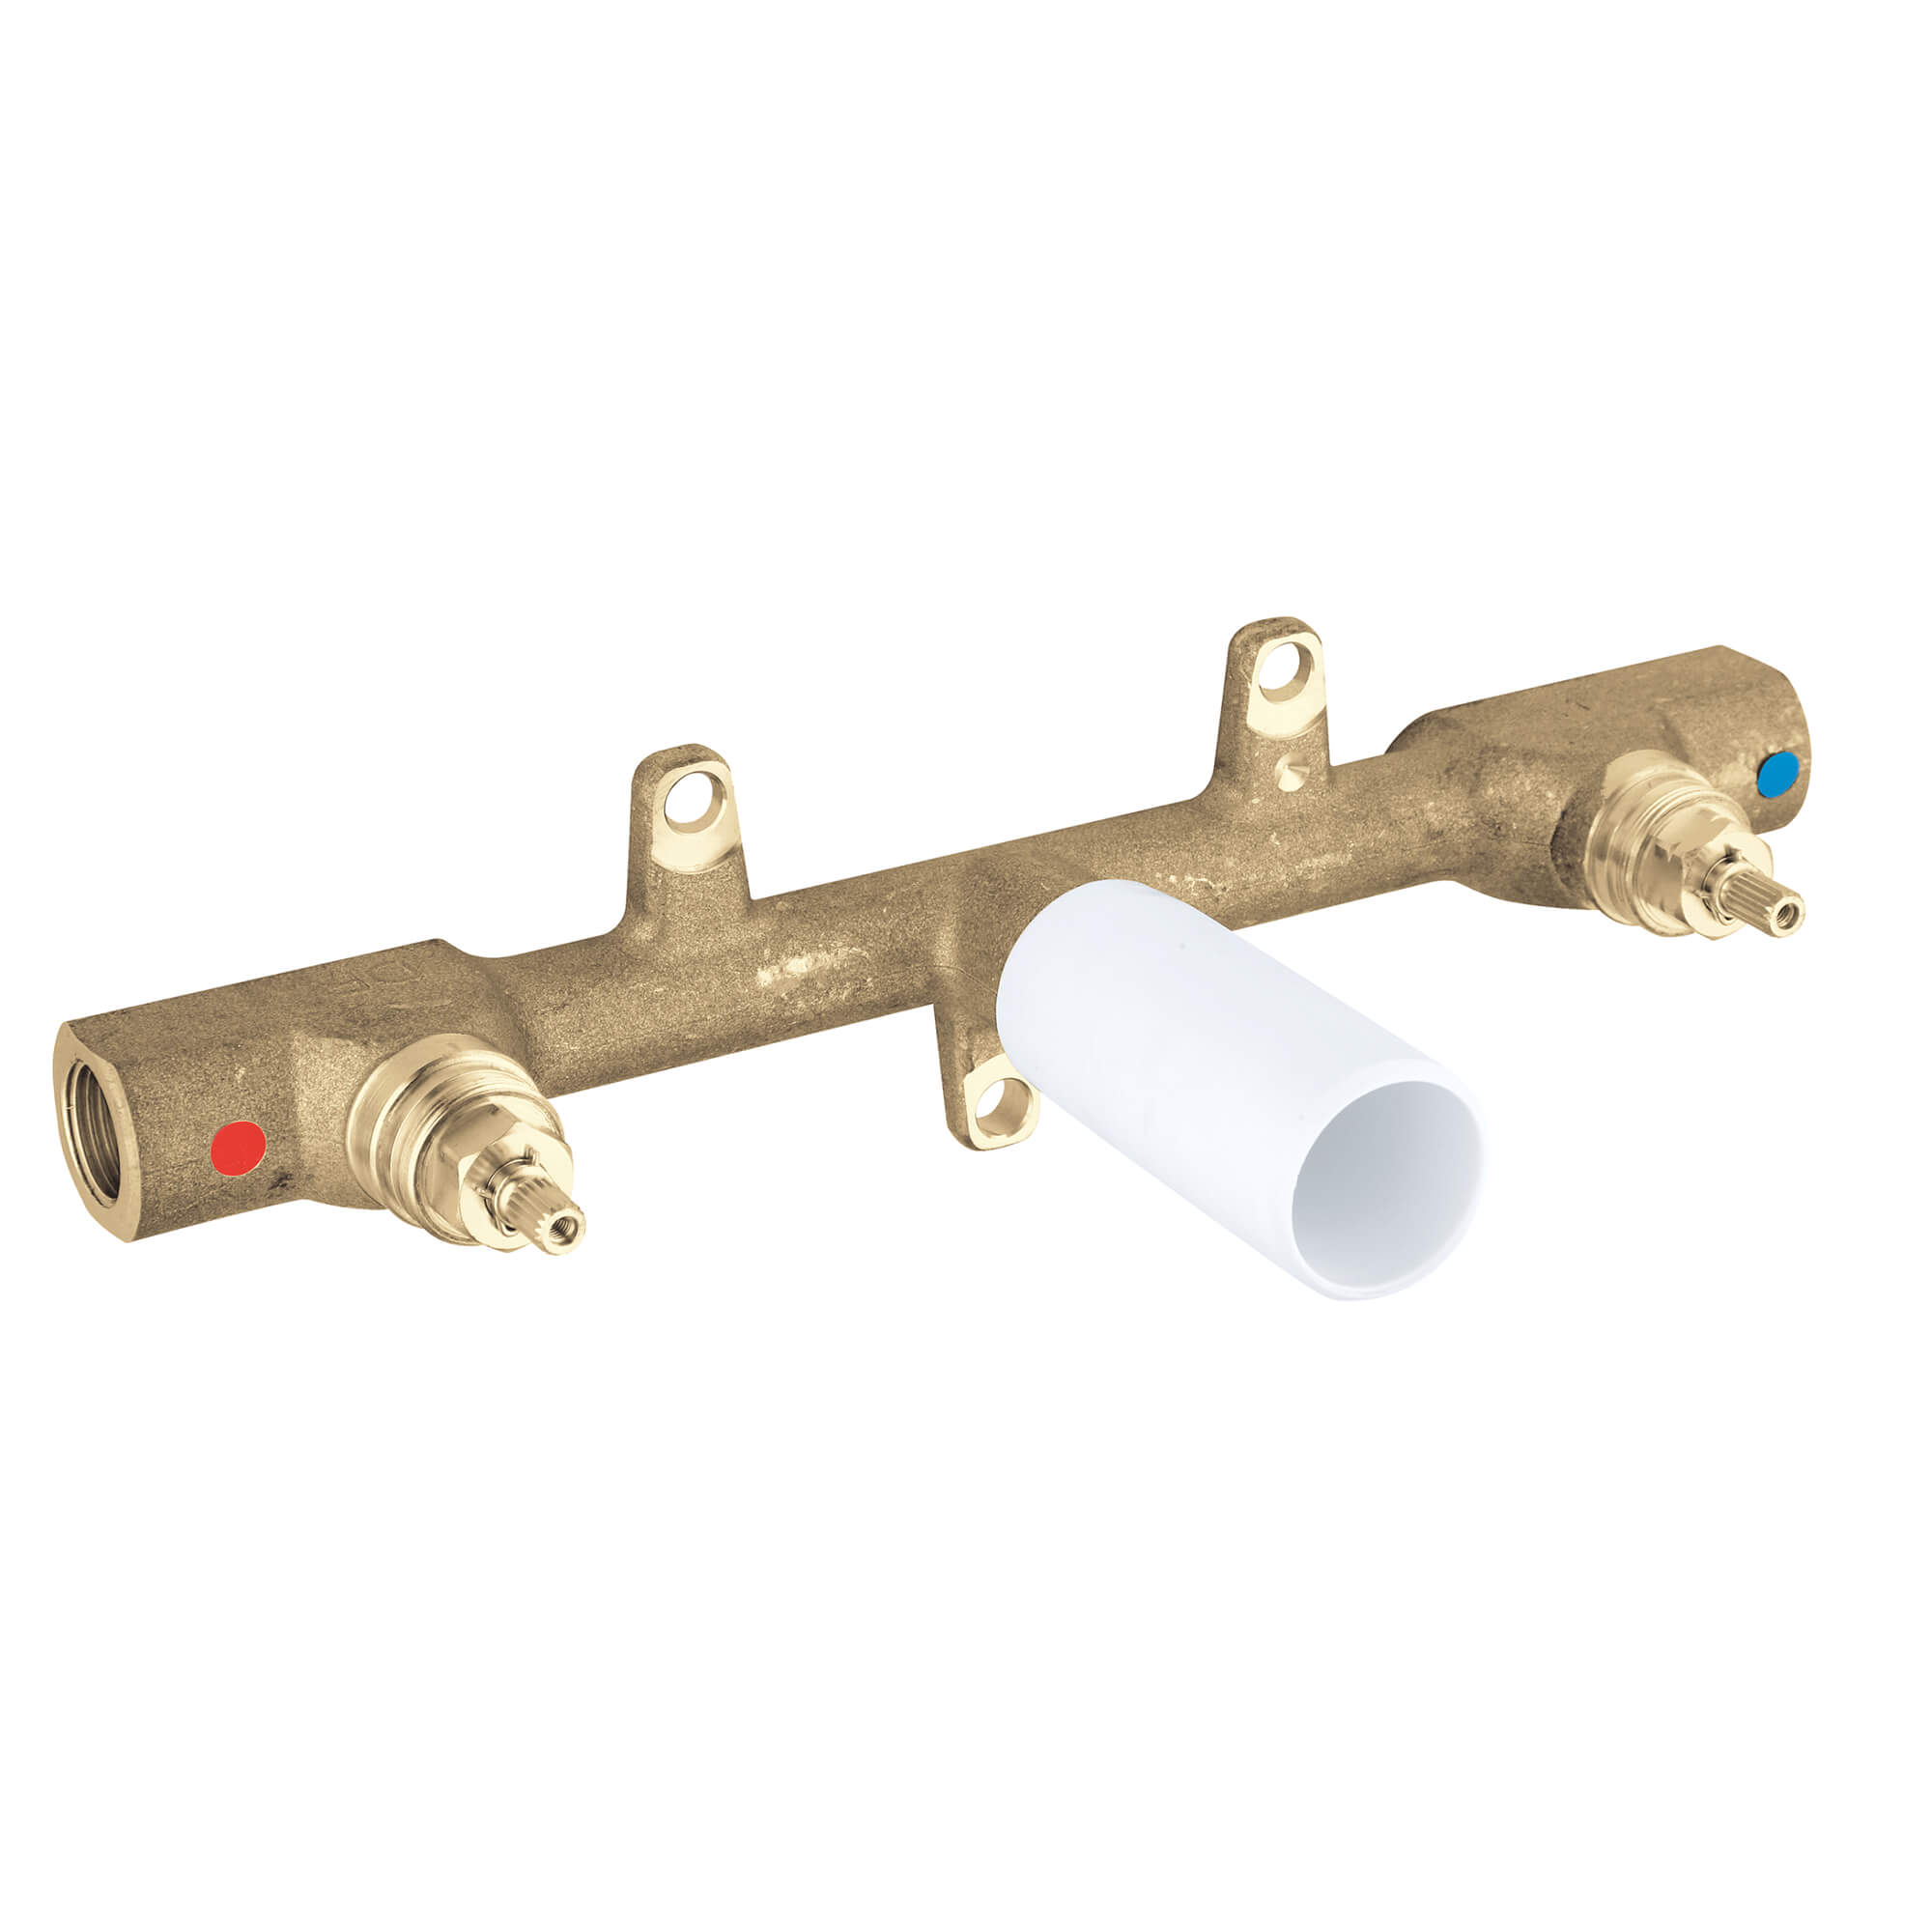 3-Hole Wall Mount Faucet Rough-In Valve